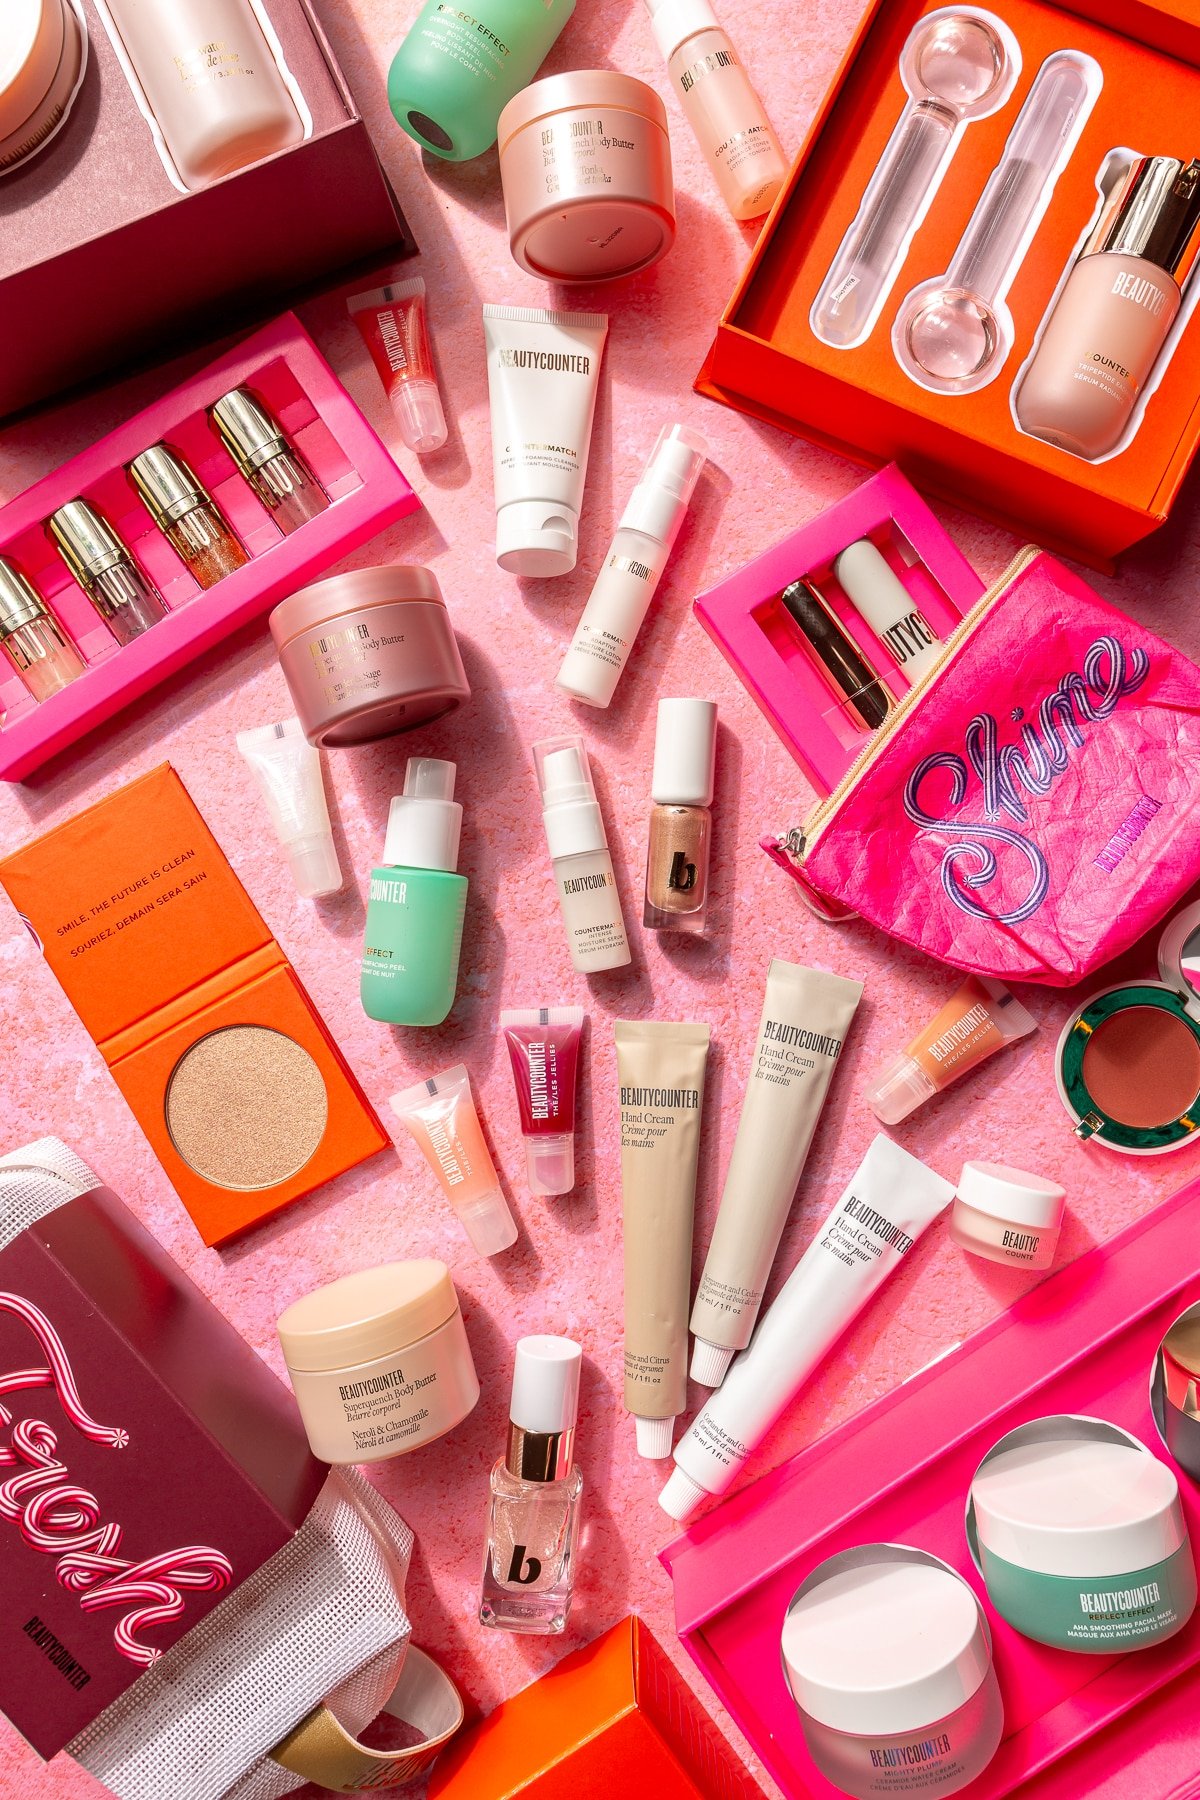 An assortment of holiday gift sets from Beautycounter on a pink background.